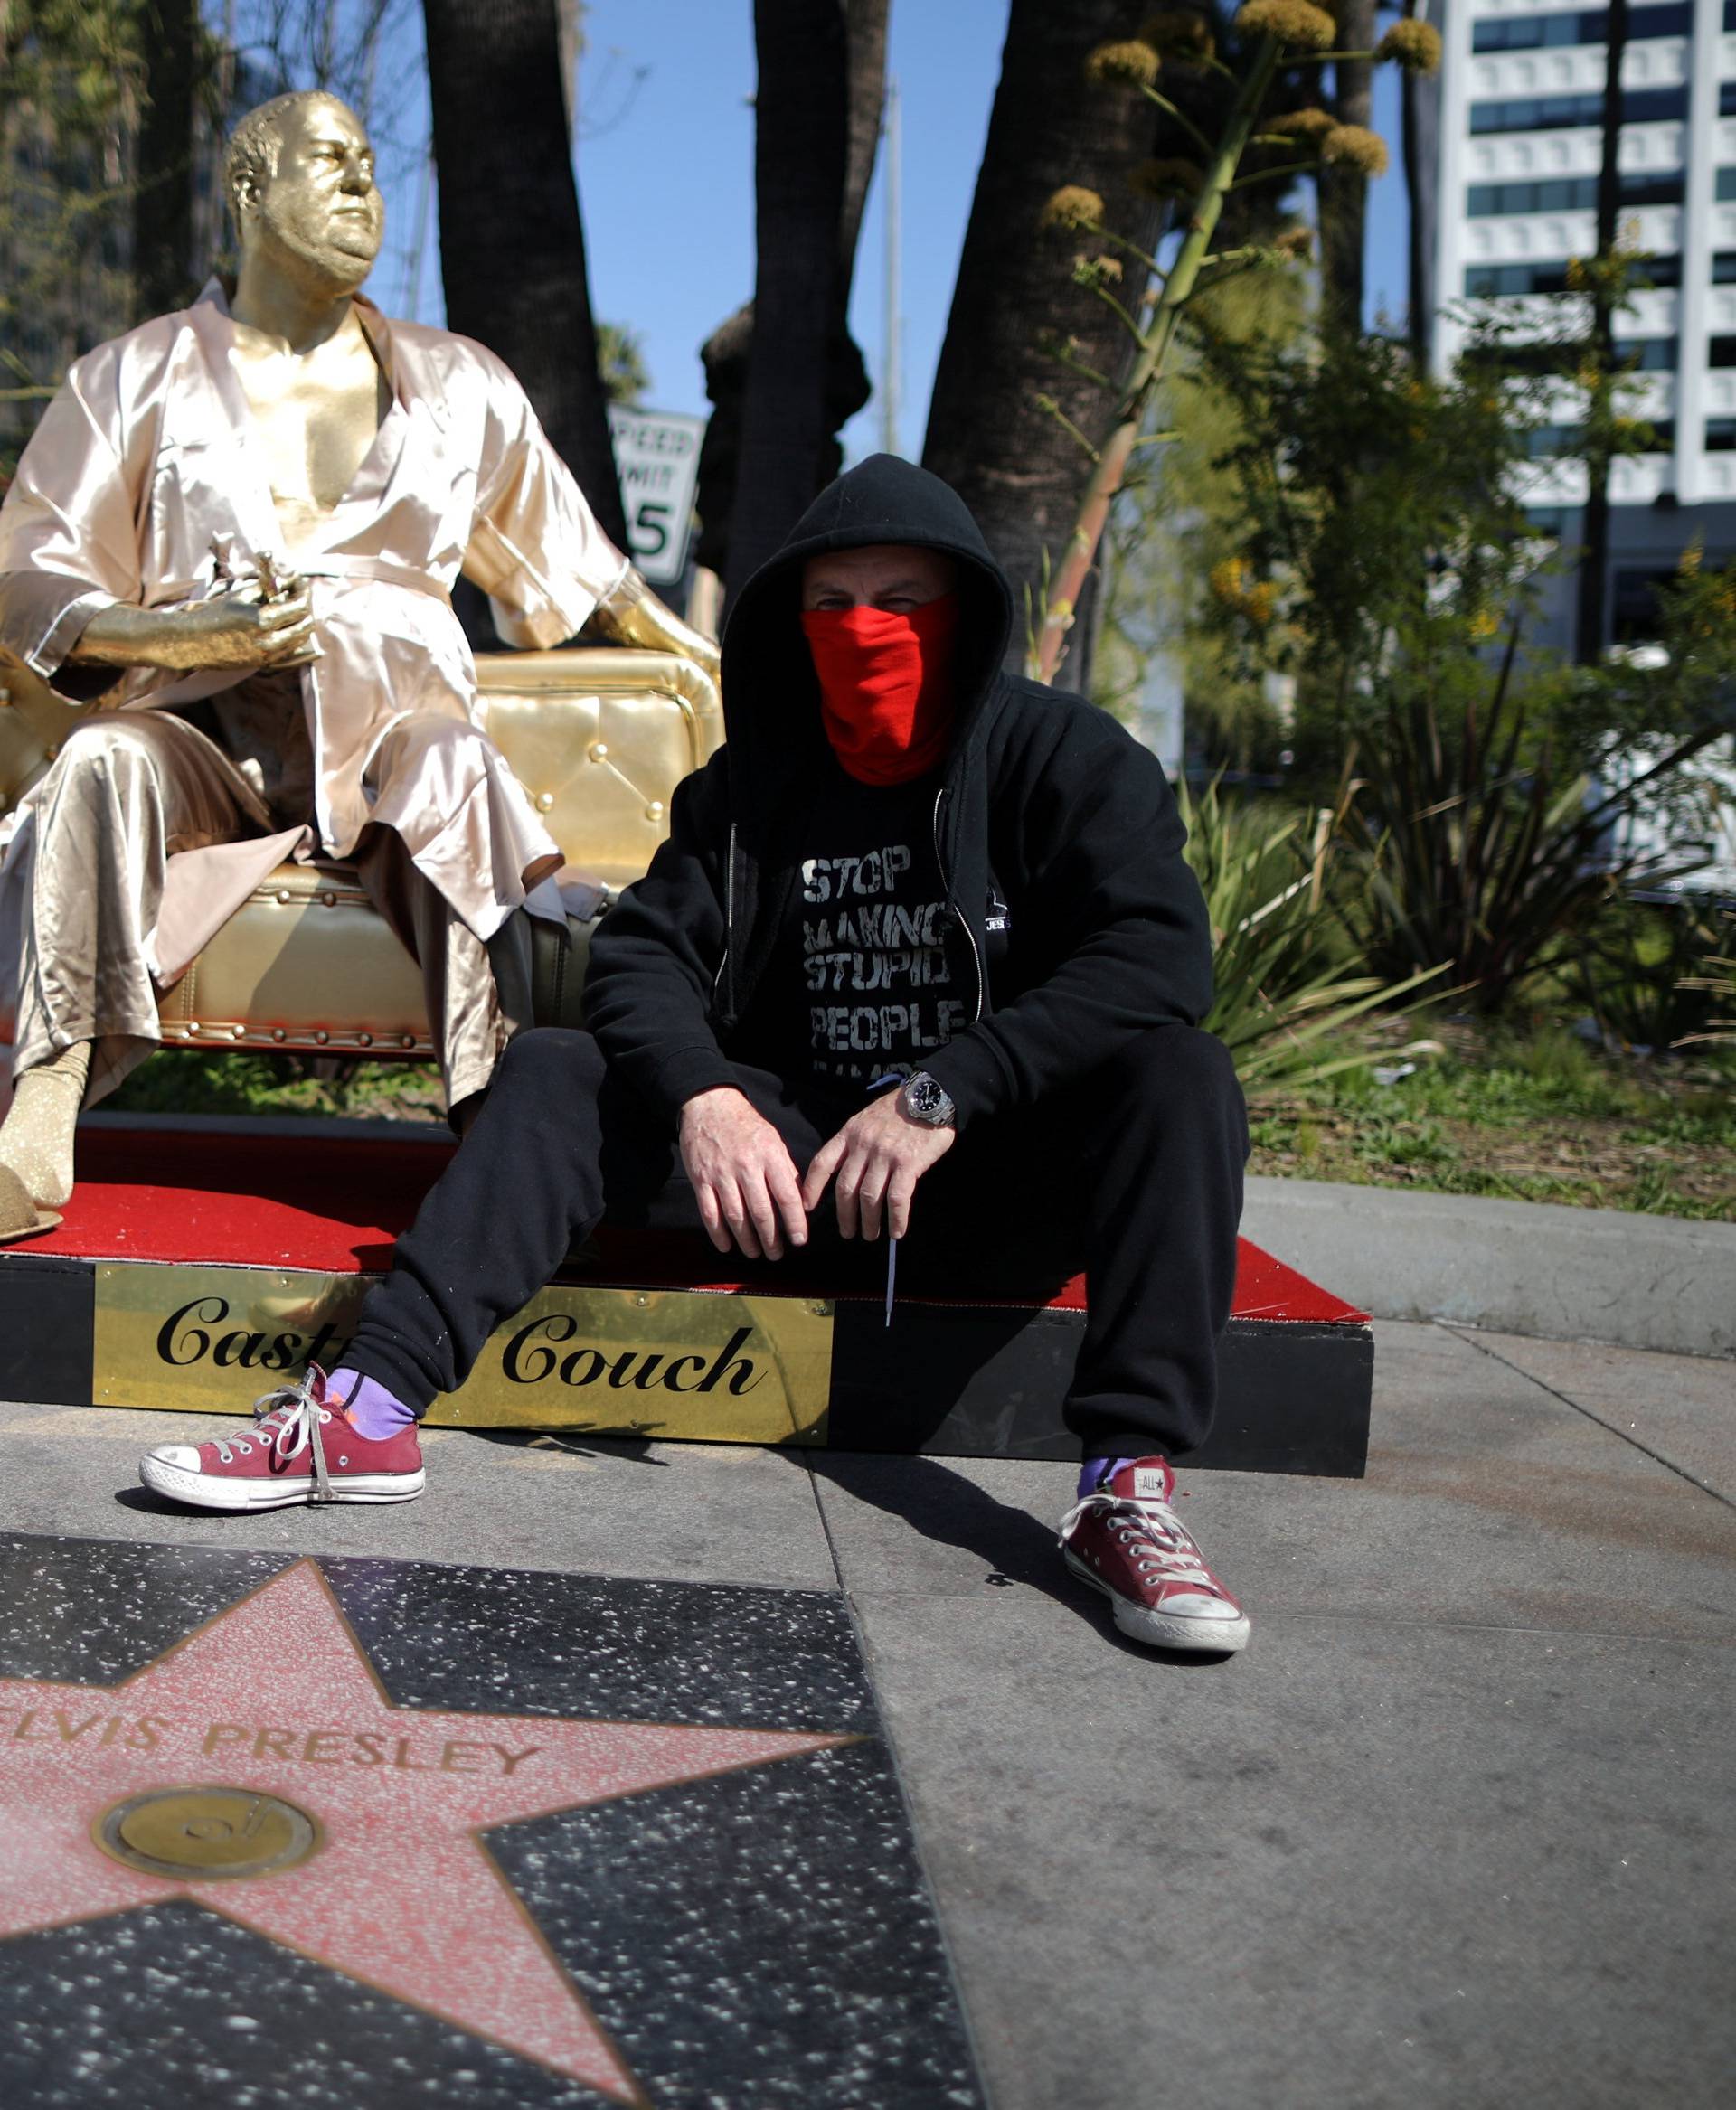 Artist Plastic Jesus sits on his statue of Harvey Weinstein on a casting couch on Hollywood Boulevard near the Dolby Theatre during preparations for the Oscars in Hollywood, Los Angeles